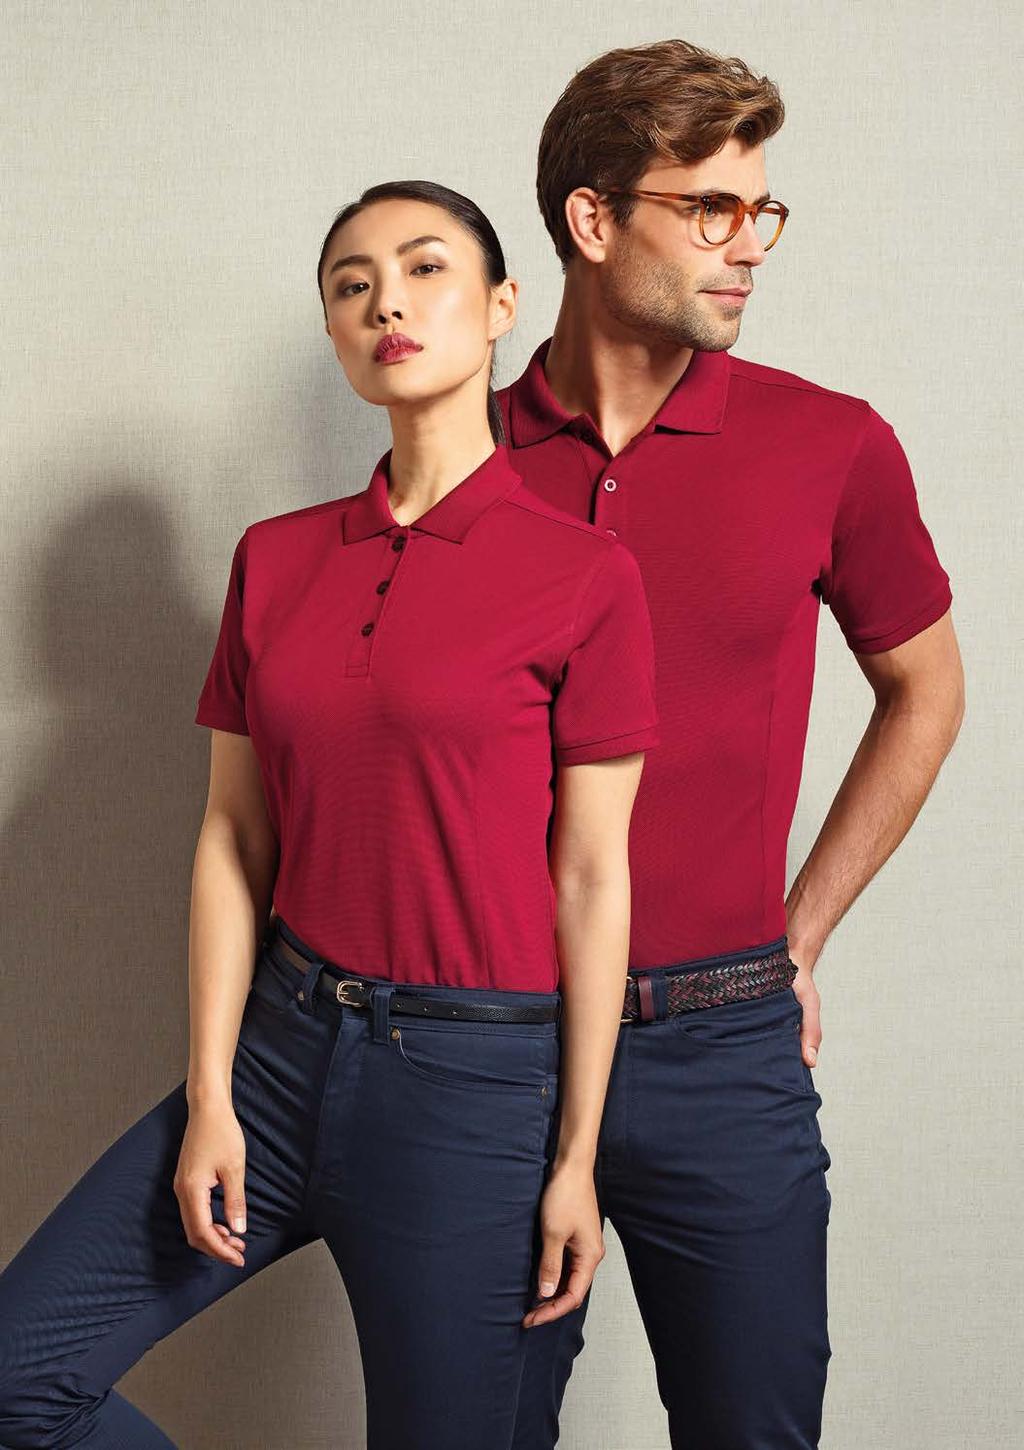 UNIFORMS THAT WORK FOR YOU PR630 next generation PERFORMANCE POLO PR632 MEN S COOLCHECKER PLUS PIQUE POLO - COOLPLUS PR630 Ribbed knit collar and cuffs 3 button placket, self coloured Side panels for